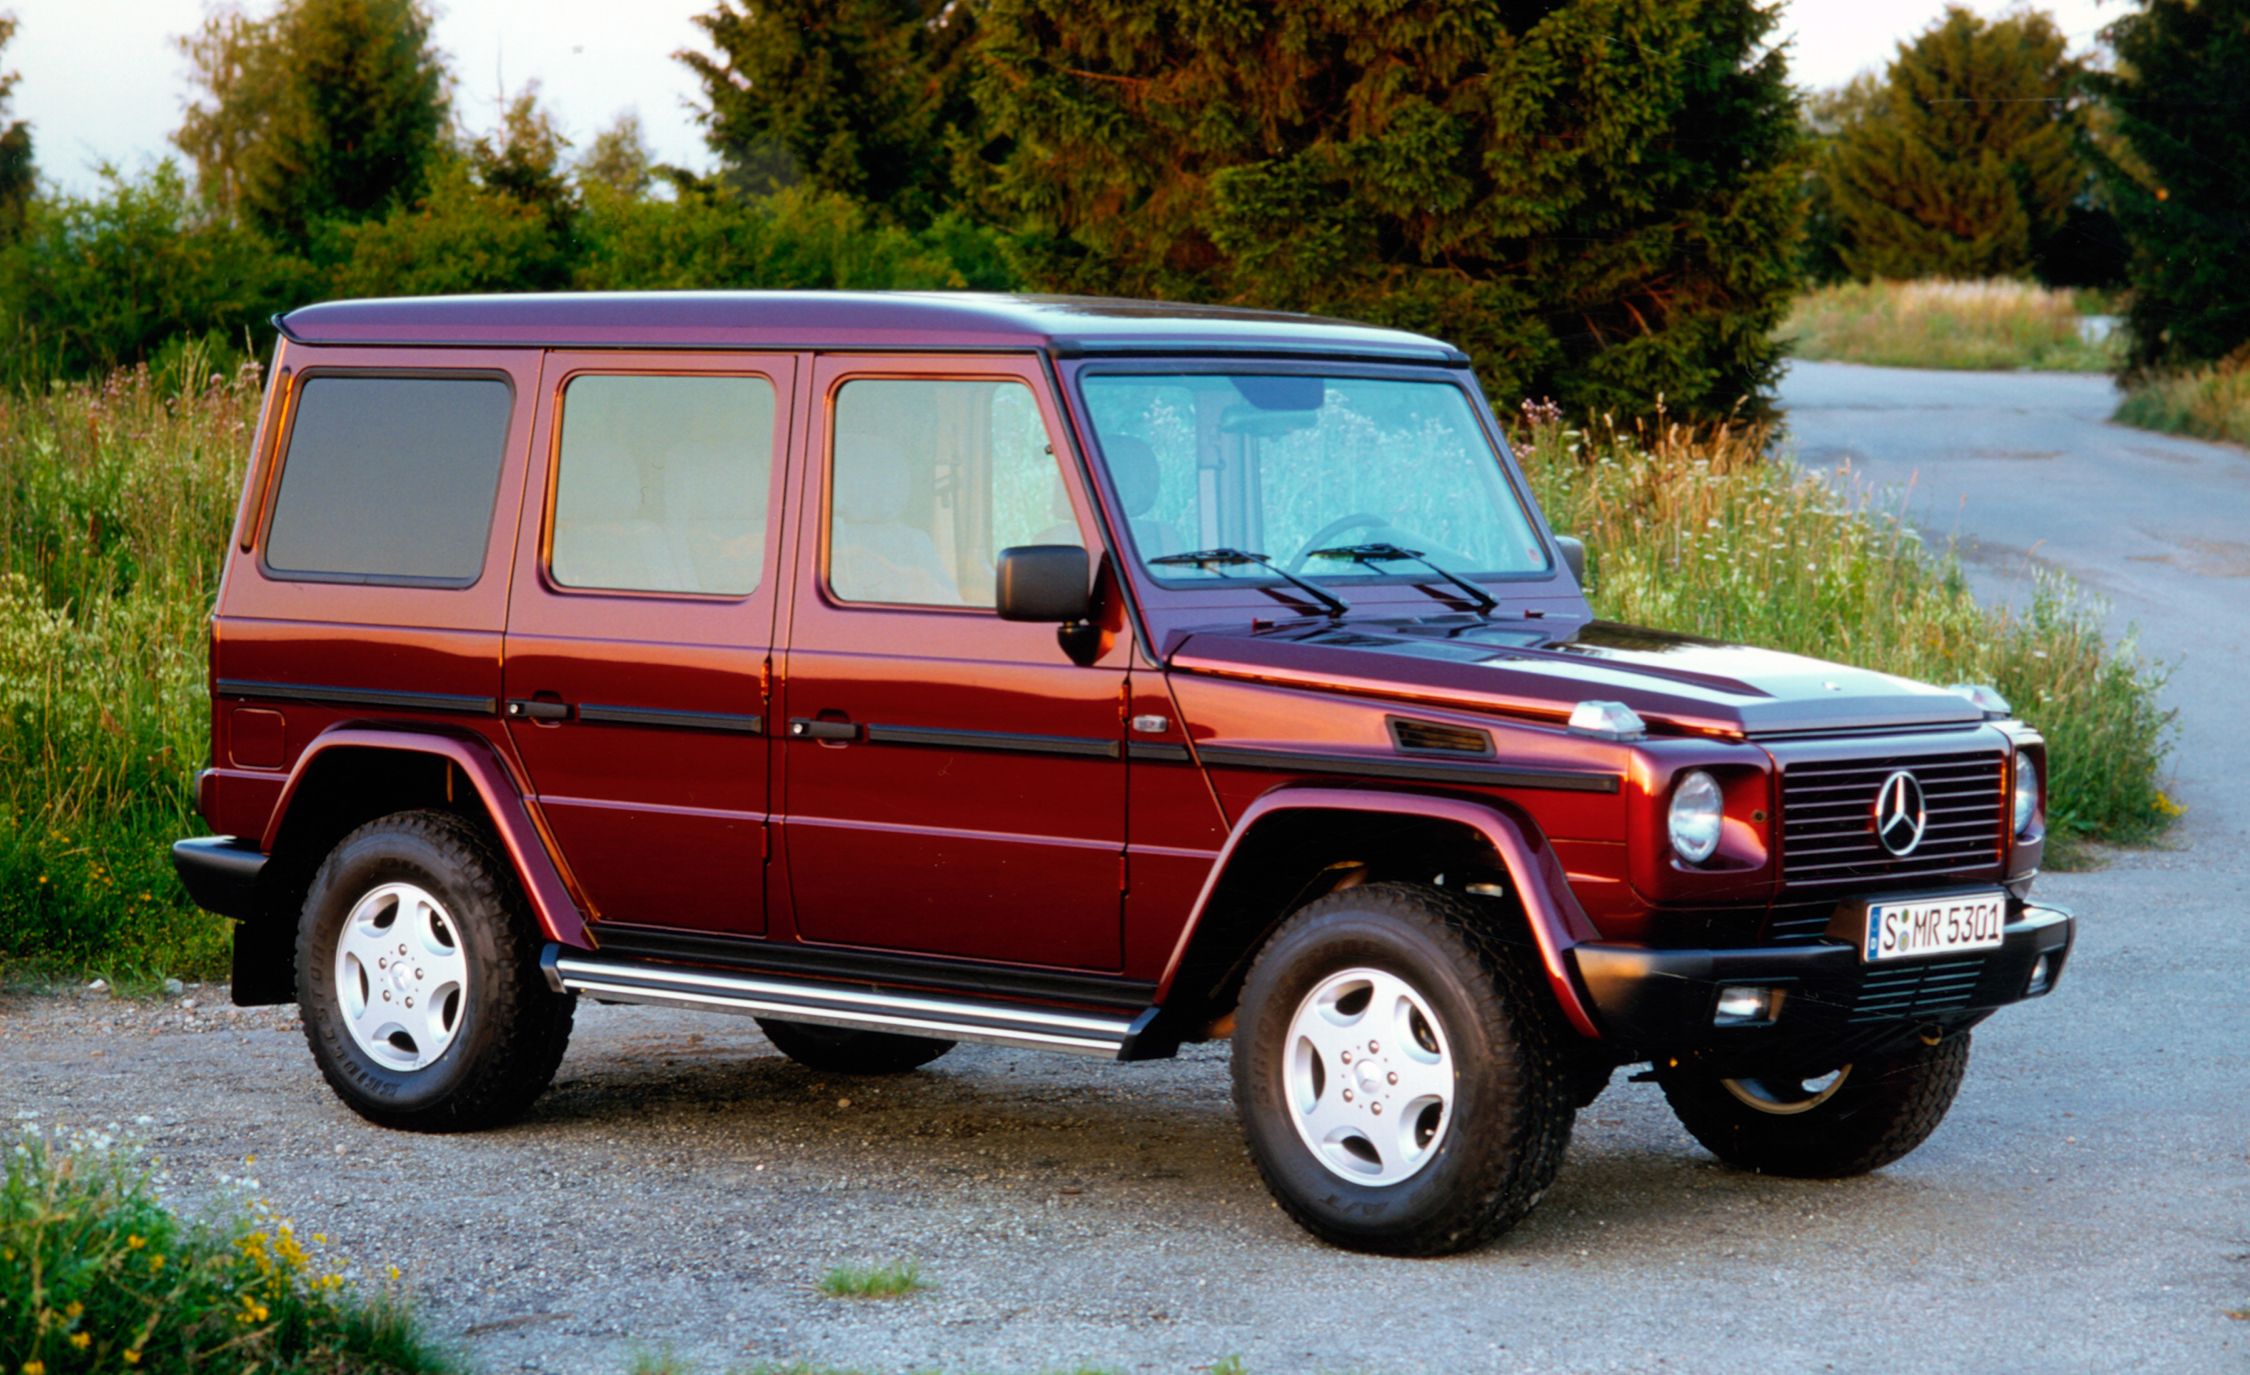 visual history of the mercedes benz g wagen from brute to bourgeois mercedes benz g wagen